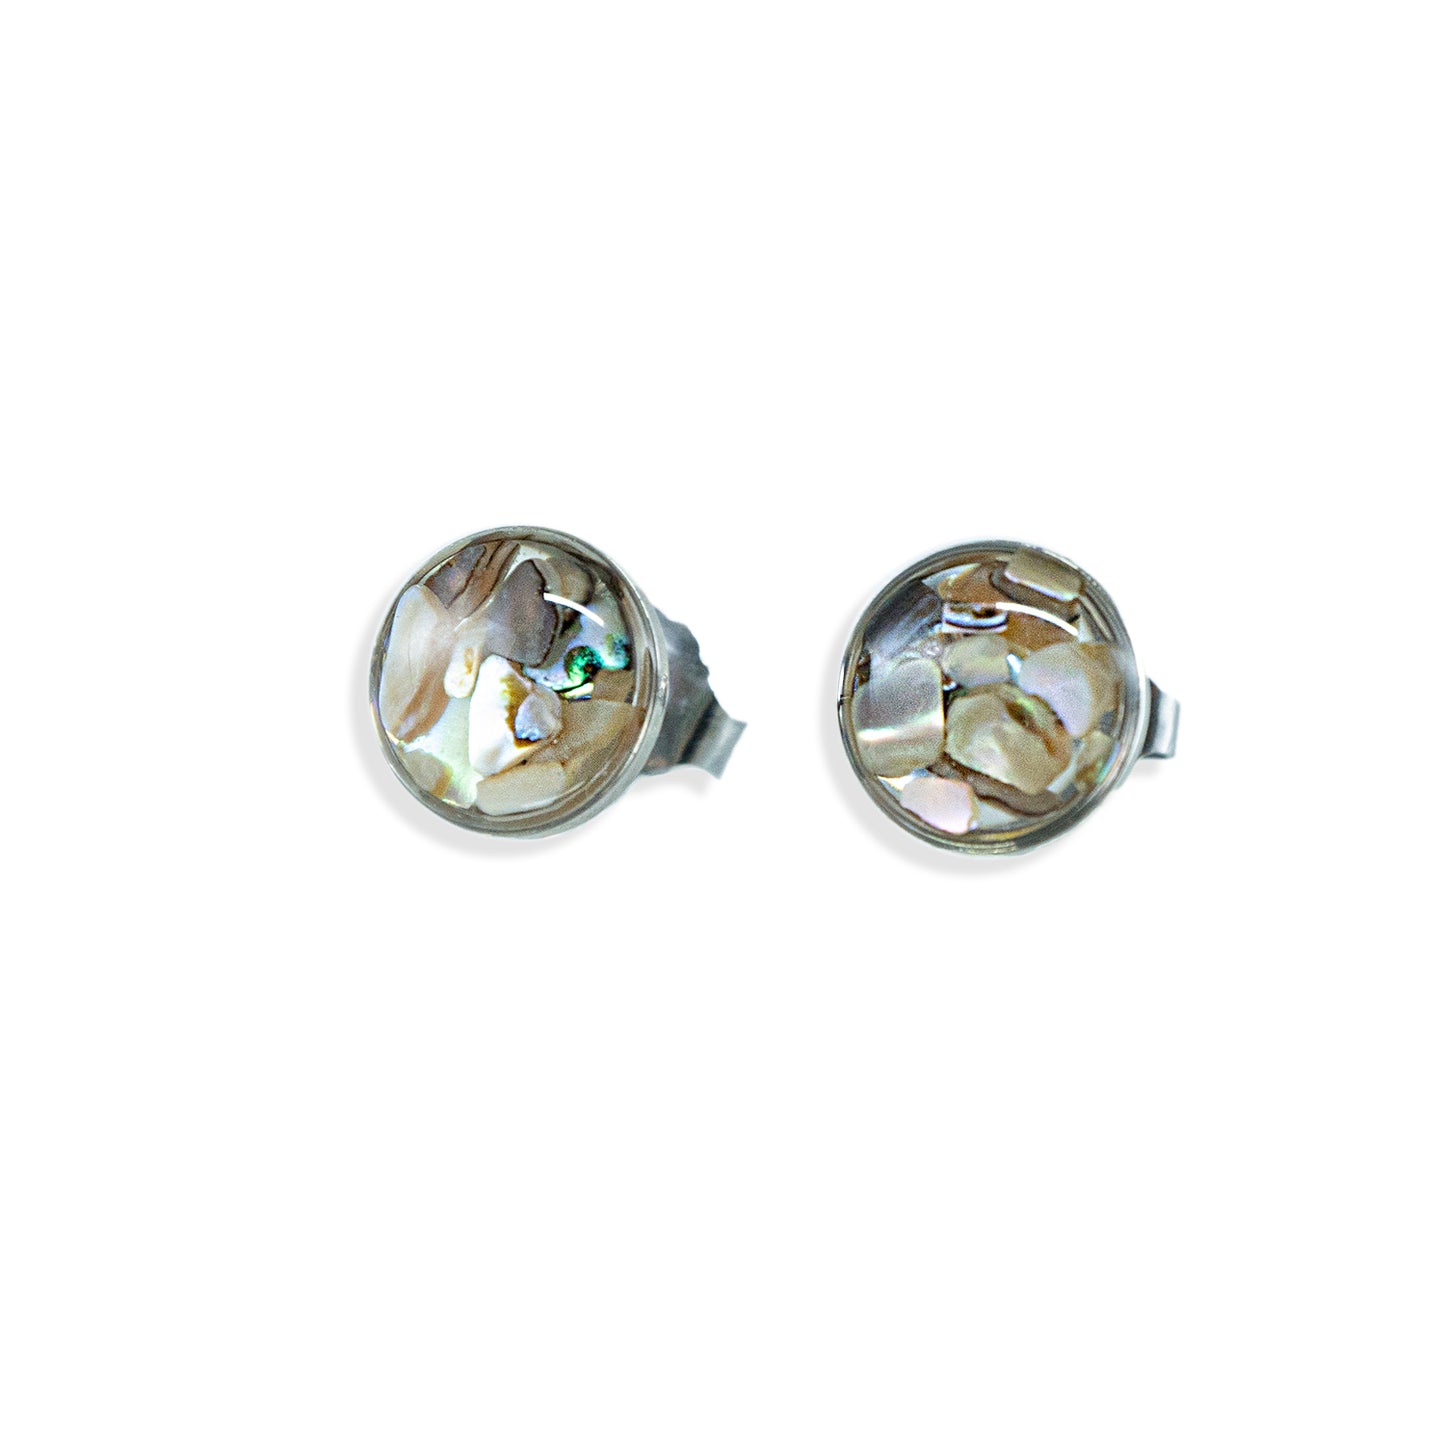 Abalone Studs in silver